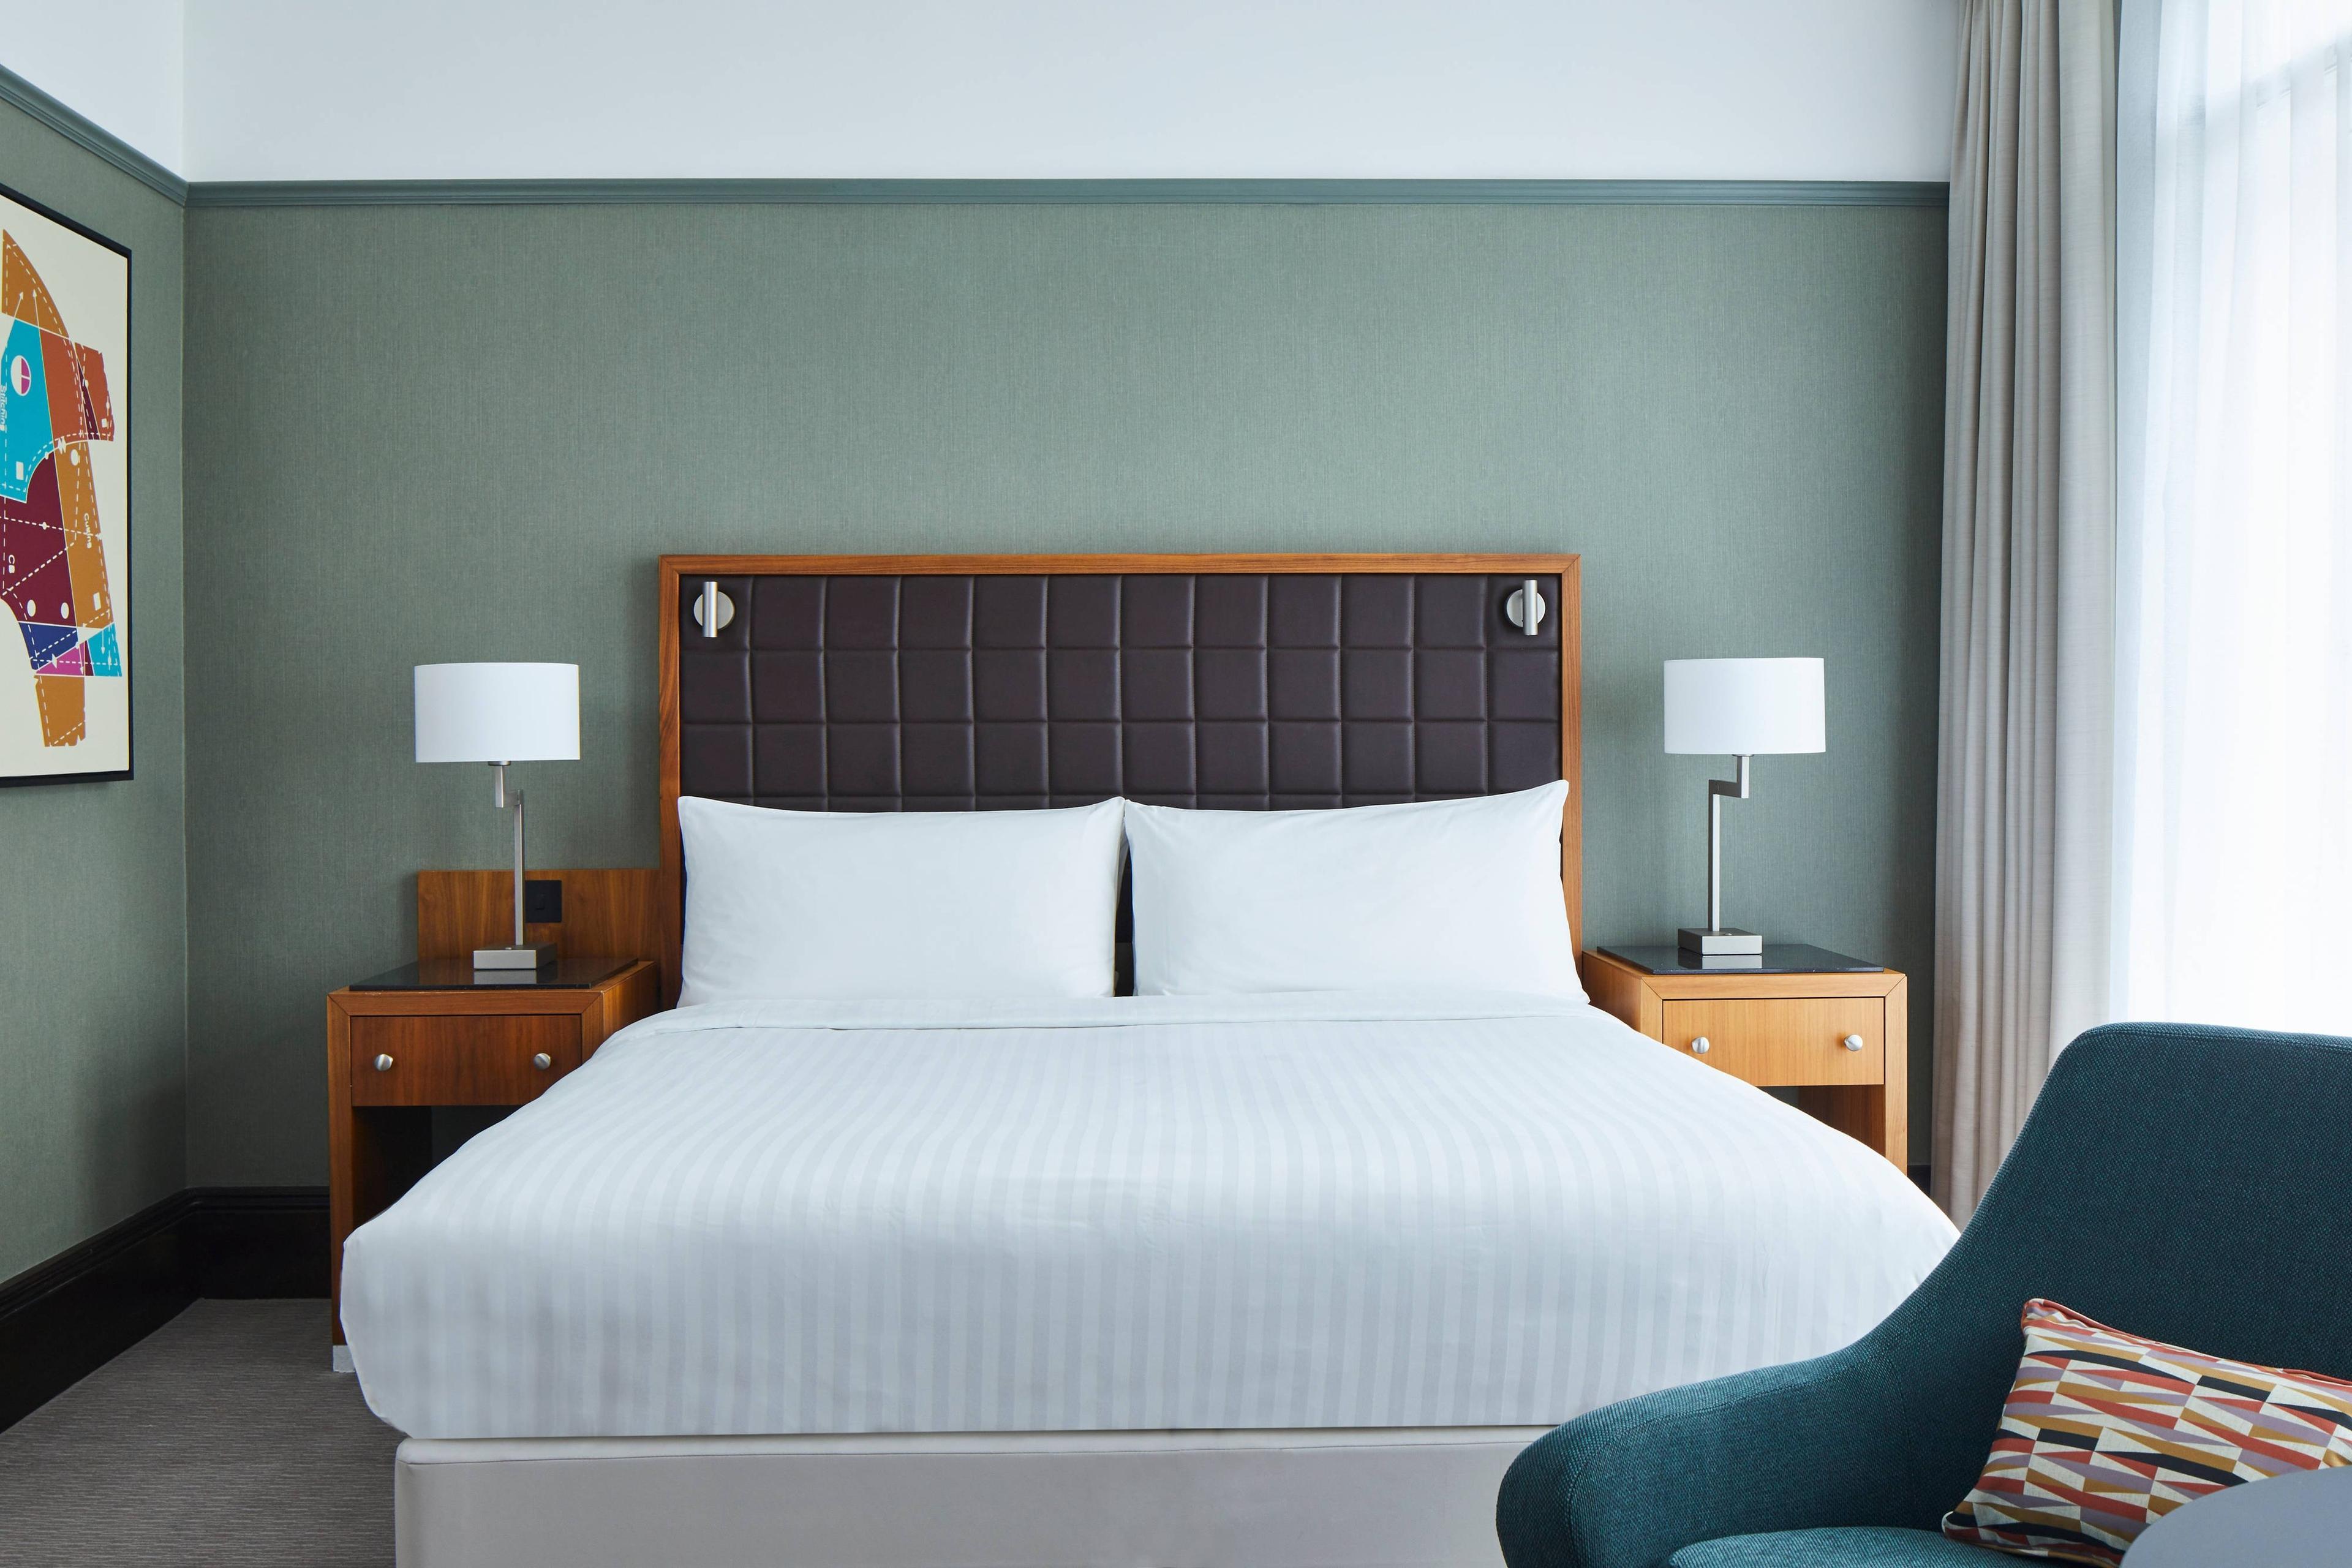 Enjoy your time in Leeds with comfortable amenities and a spacious room when you reserve our Deluxe Queen guest room.